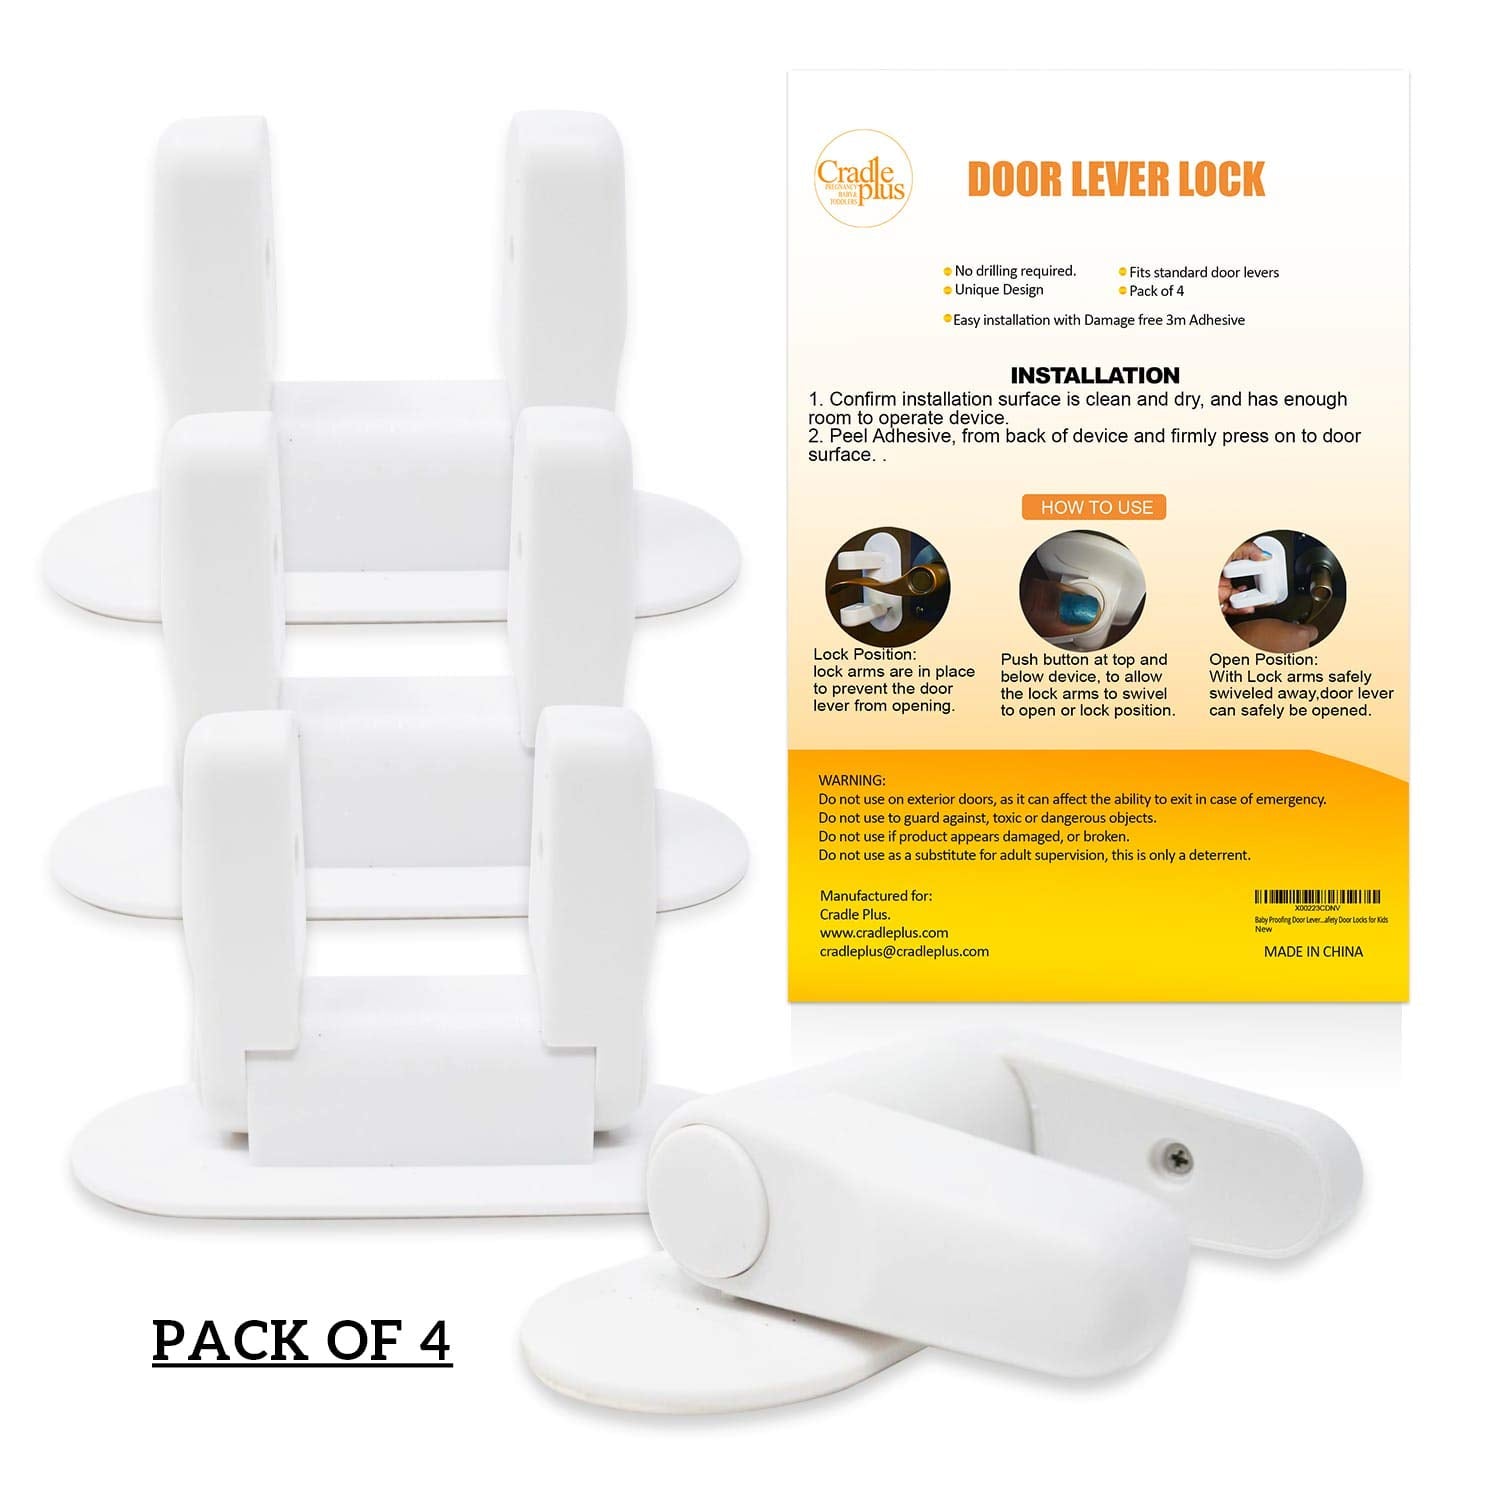 Door Lever Lock Child Proof - 2 Pack White Door Locks Design For Kids Safety  - Child Proof Doors & Handles 3m Adhesive (no Drilling) - Easily Used And